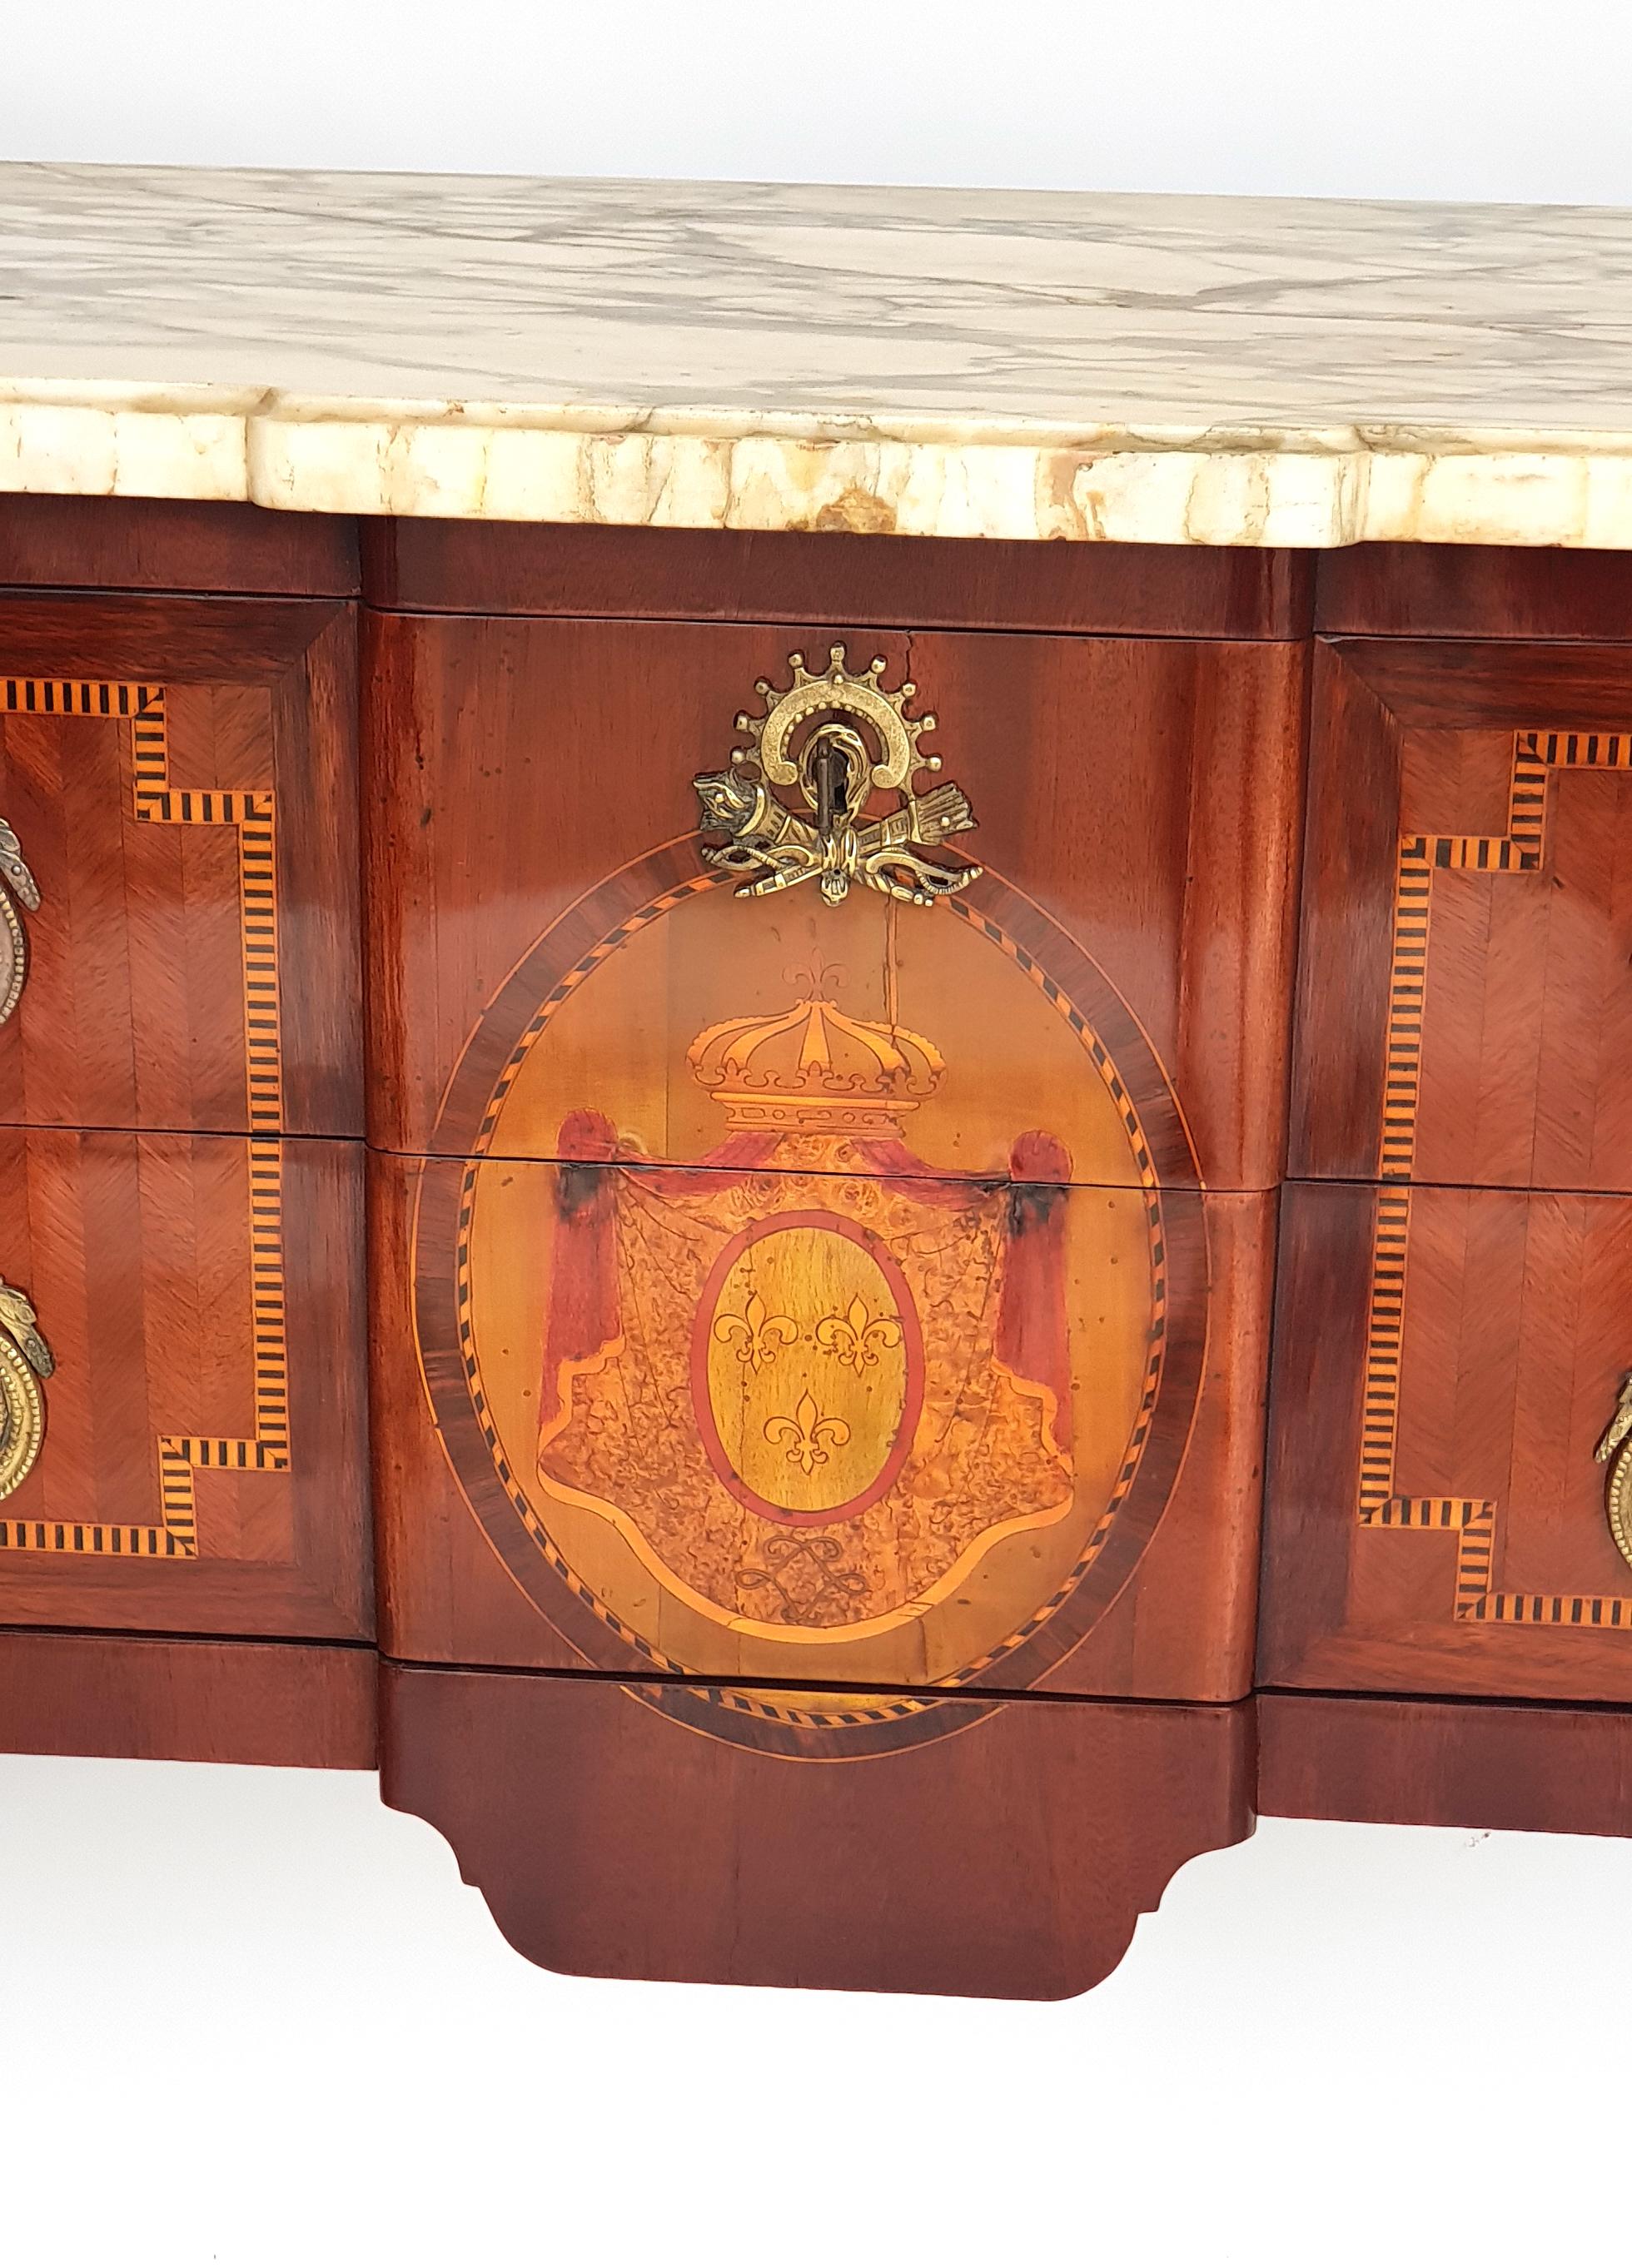 Pair of almost identical Louis XVI Dressers, Paris, 1790s. Provenance: A noble family. Made of walnut, lemon wood, maple, ebony, and other Fine woods.

Dresser 1: Paris circa 1790, signed 